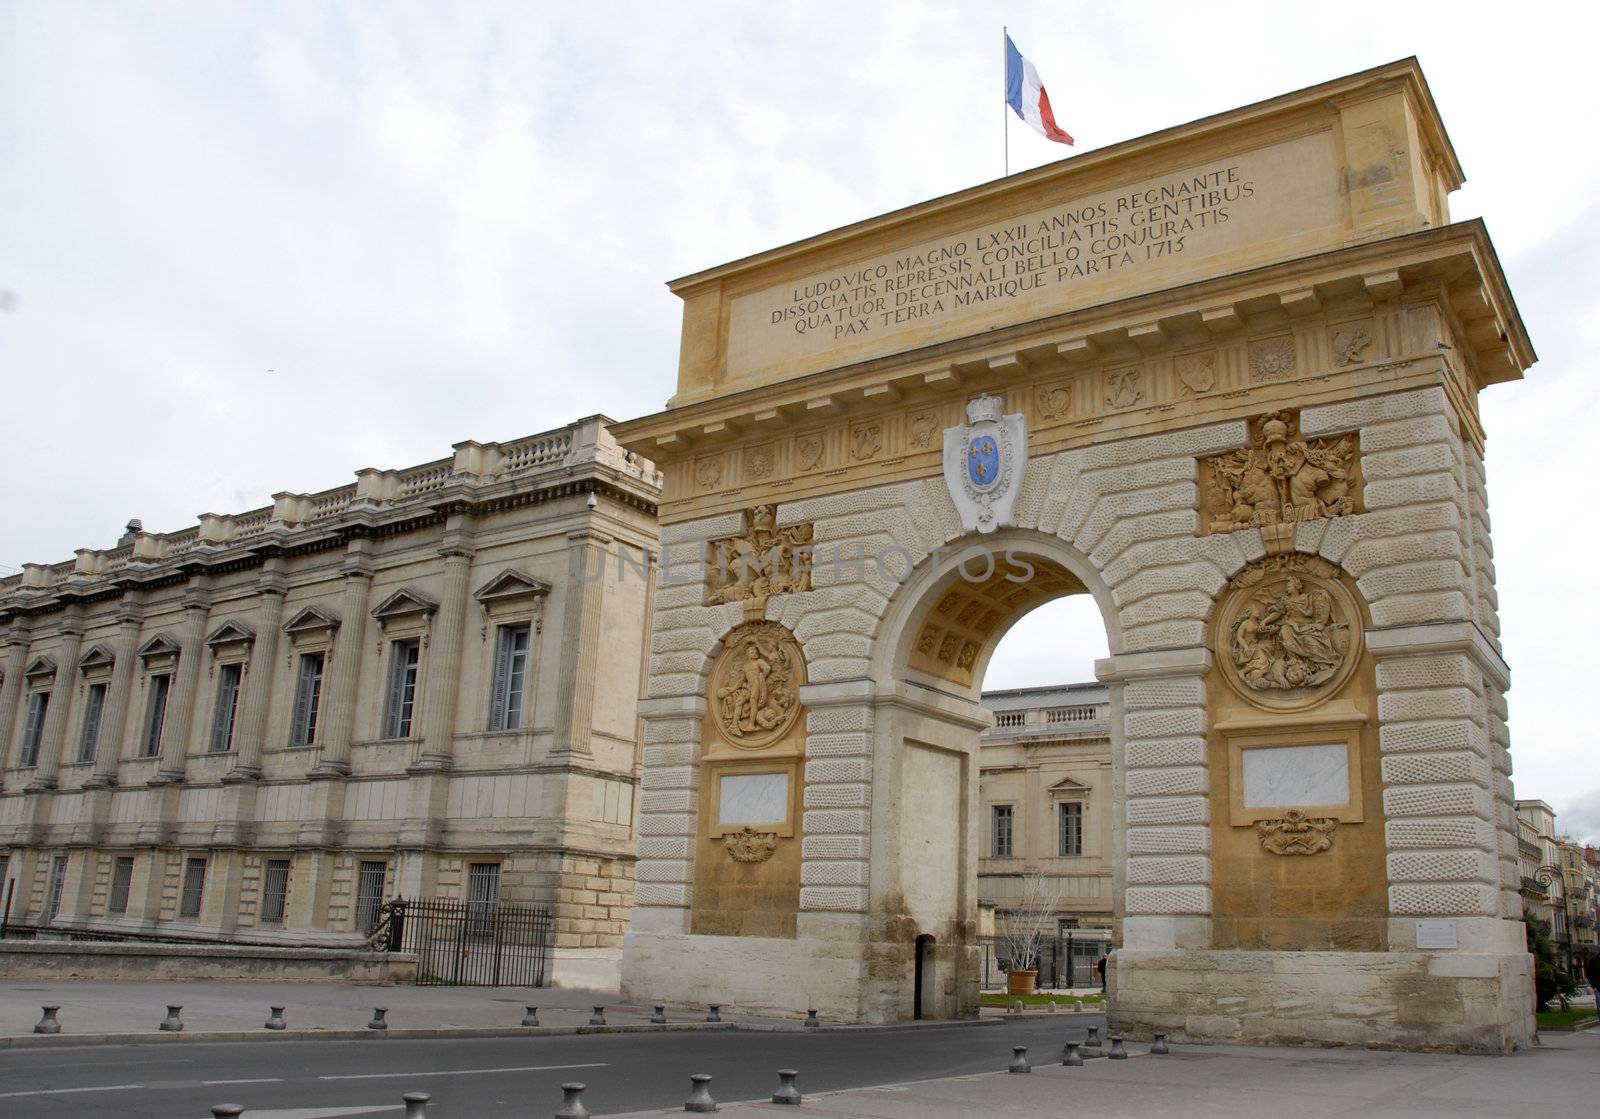 Arc de Triomphe, Montpellier, Languedoc Roussillon, France. Built in 1692 by Charles-Augustin Daviler to the glory of Louis XIV 